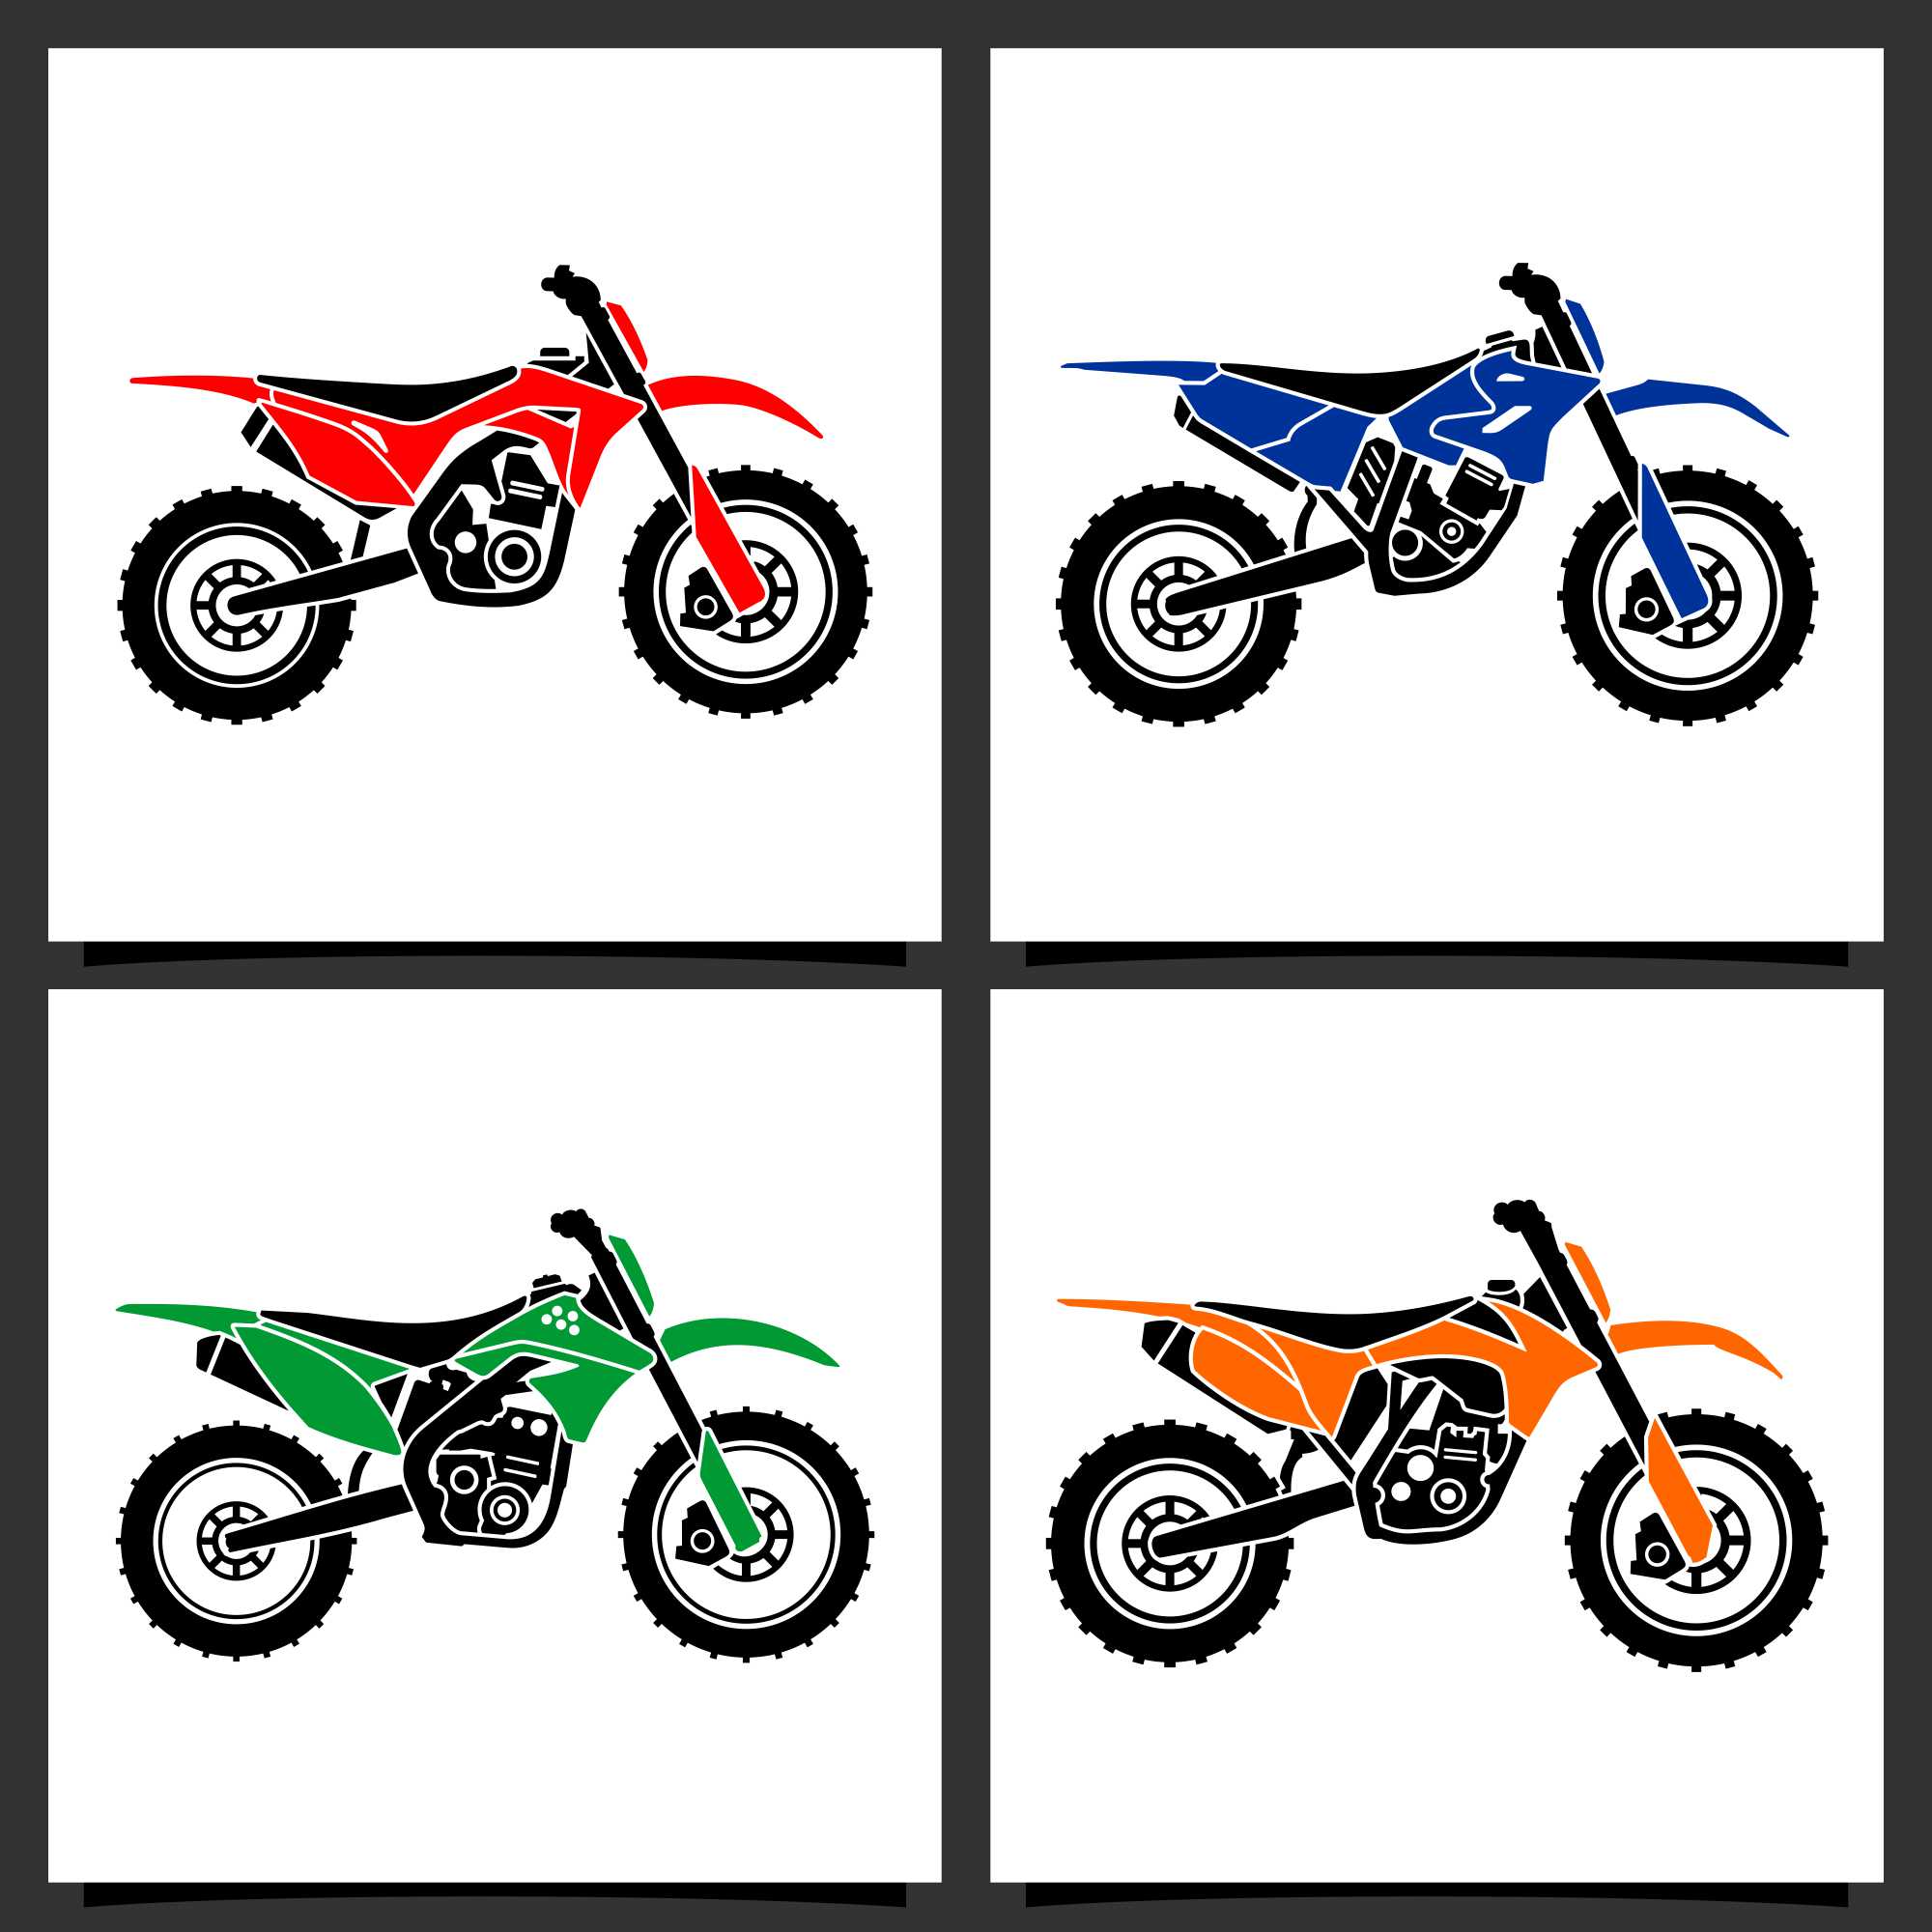 Motocross vector design collection - $5 cover image.